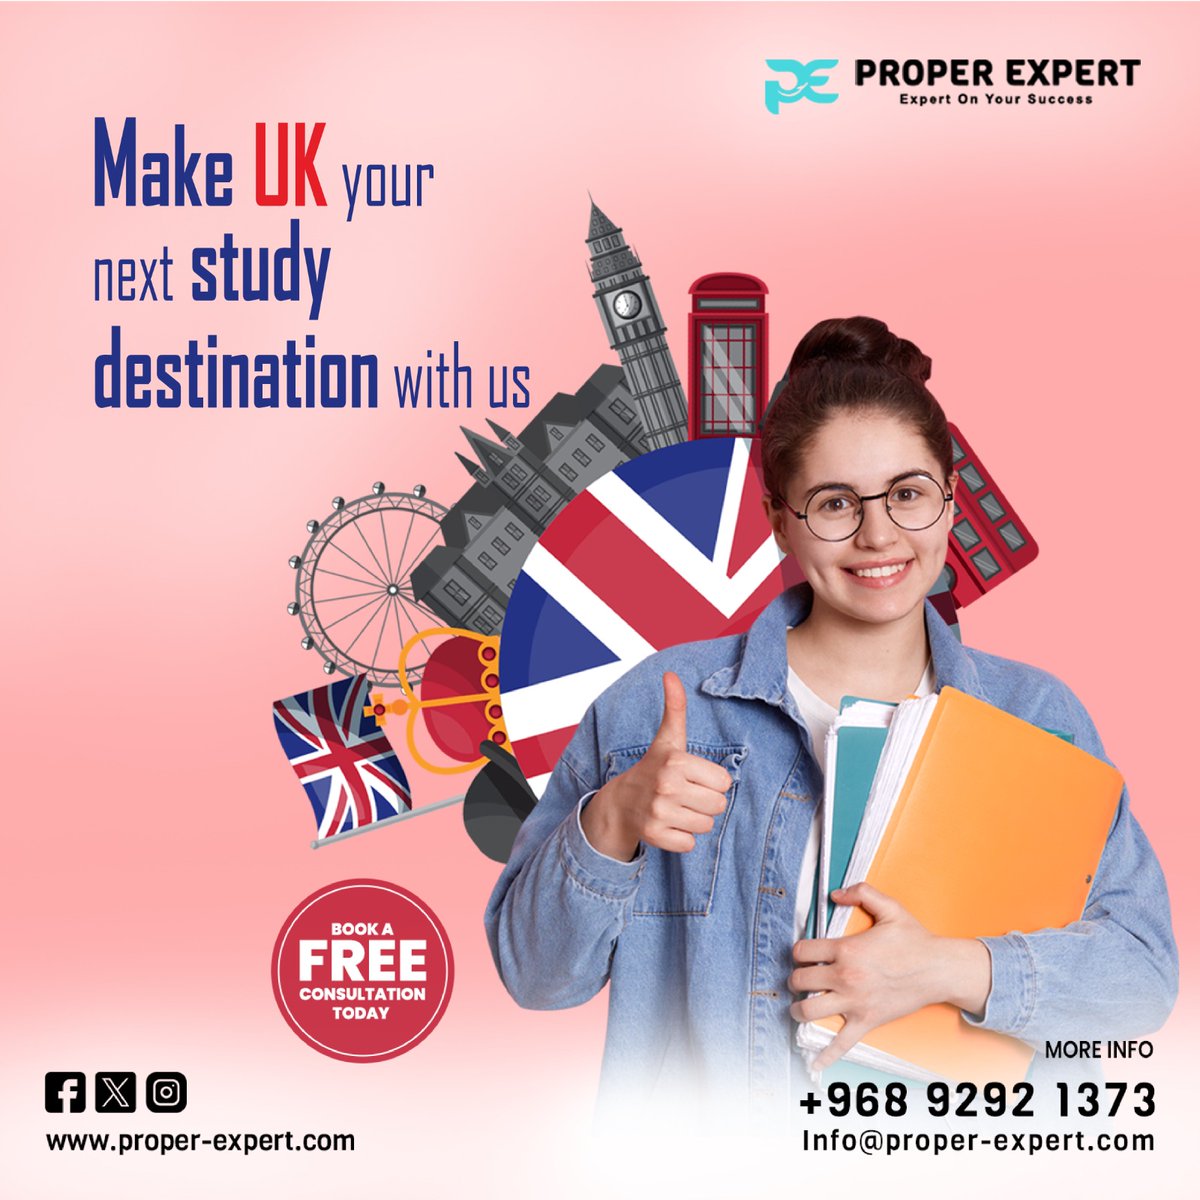 Ignite your academic journey in the UK!!!
Choose the UK as your study destination with the guidance of Proper Expert.
.
.
.
.
#immigrationconsultancy #properexpert #omanimmigrationconsultant #migrationservices #omanvisaservices #ukvisa #ukmigrationexperts #ukmigrants